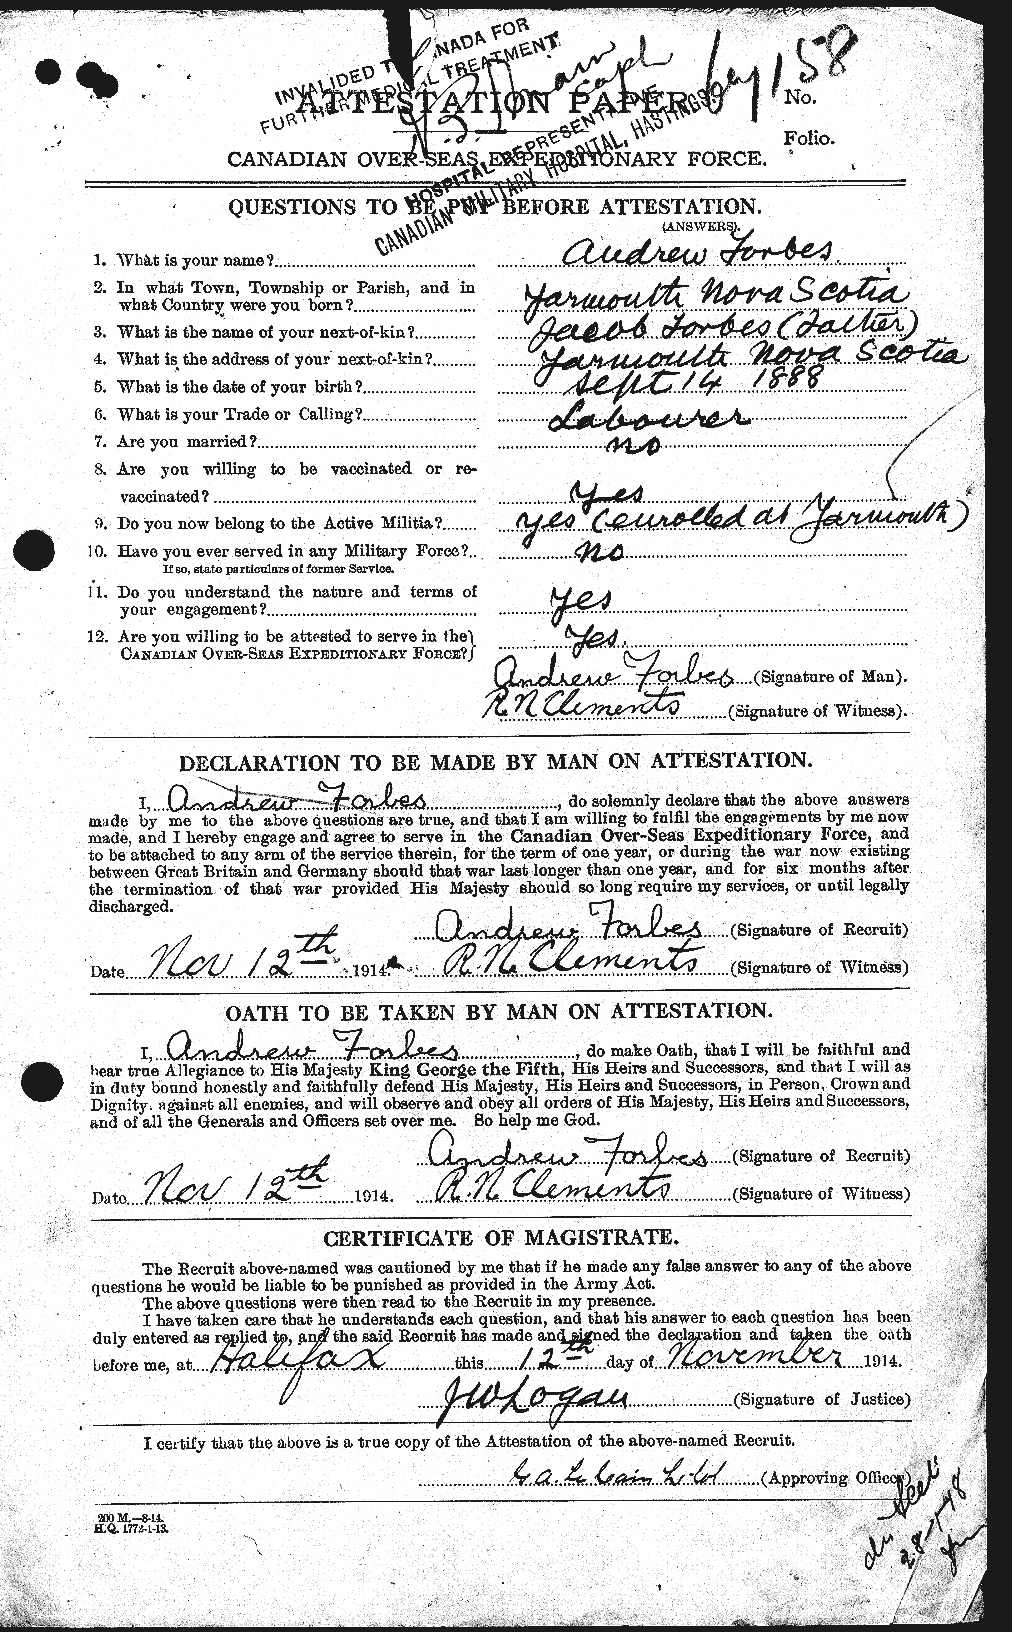 Personnel Records of the First World War - CEF 329919a